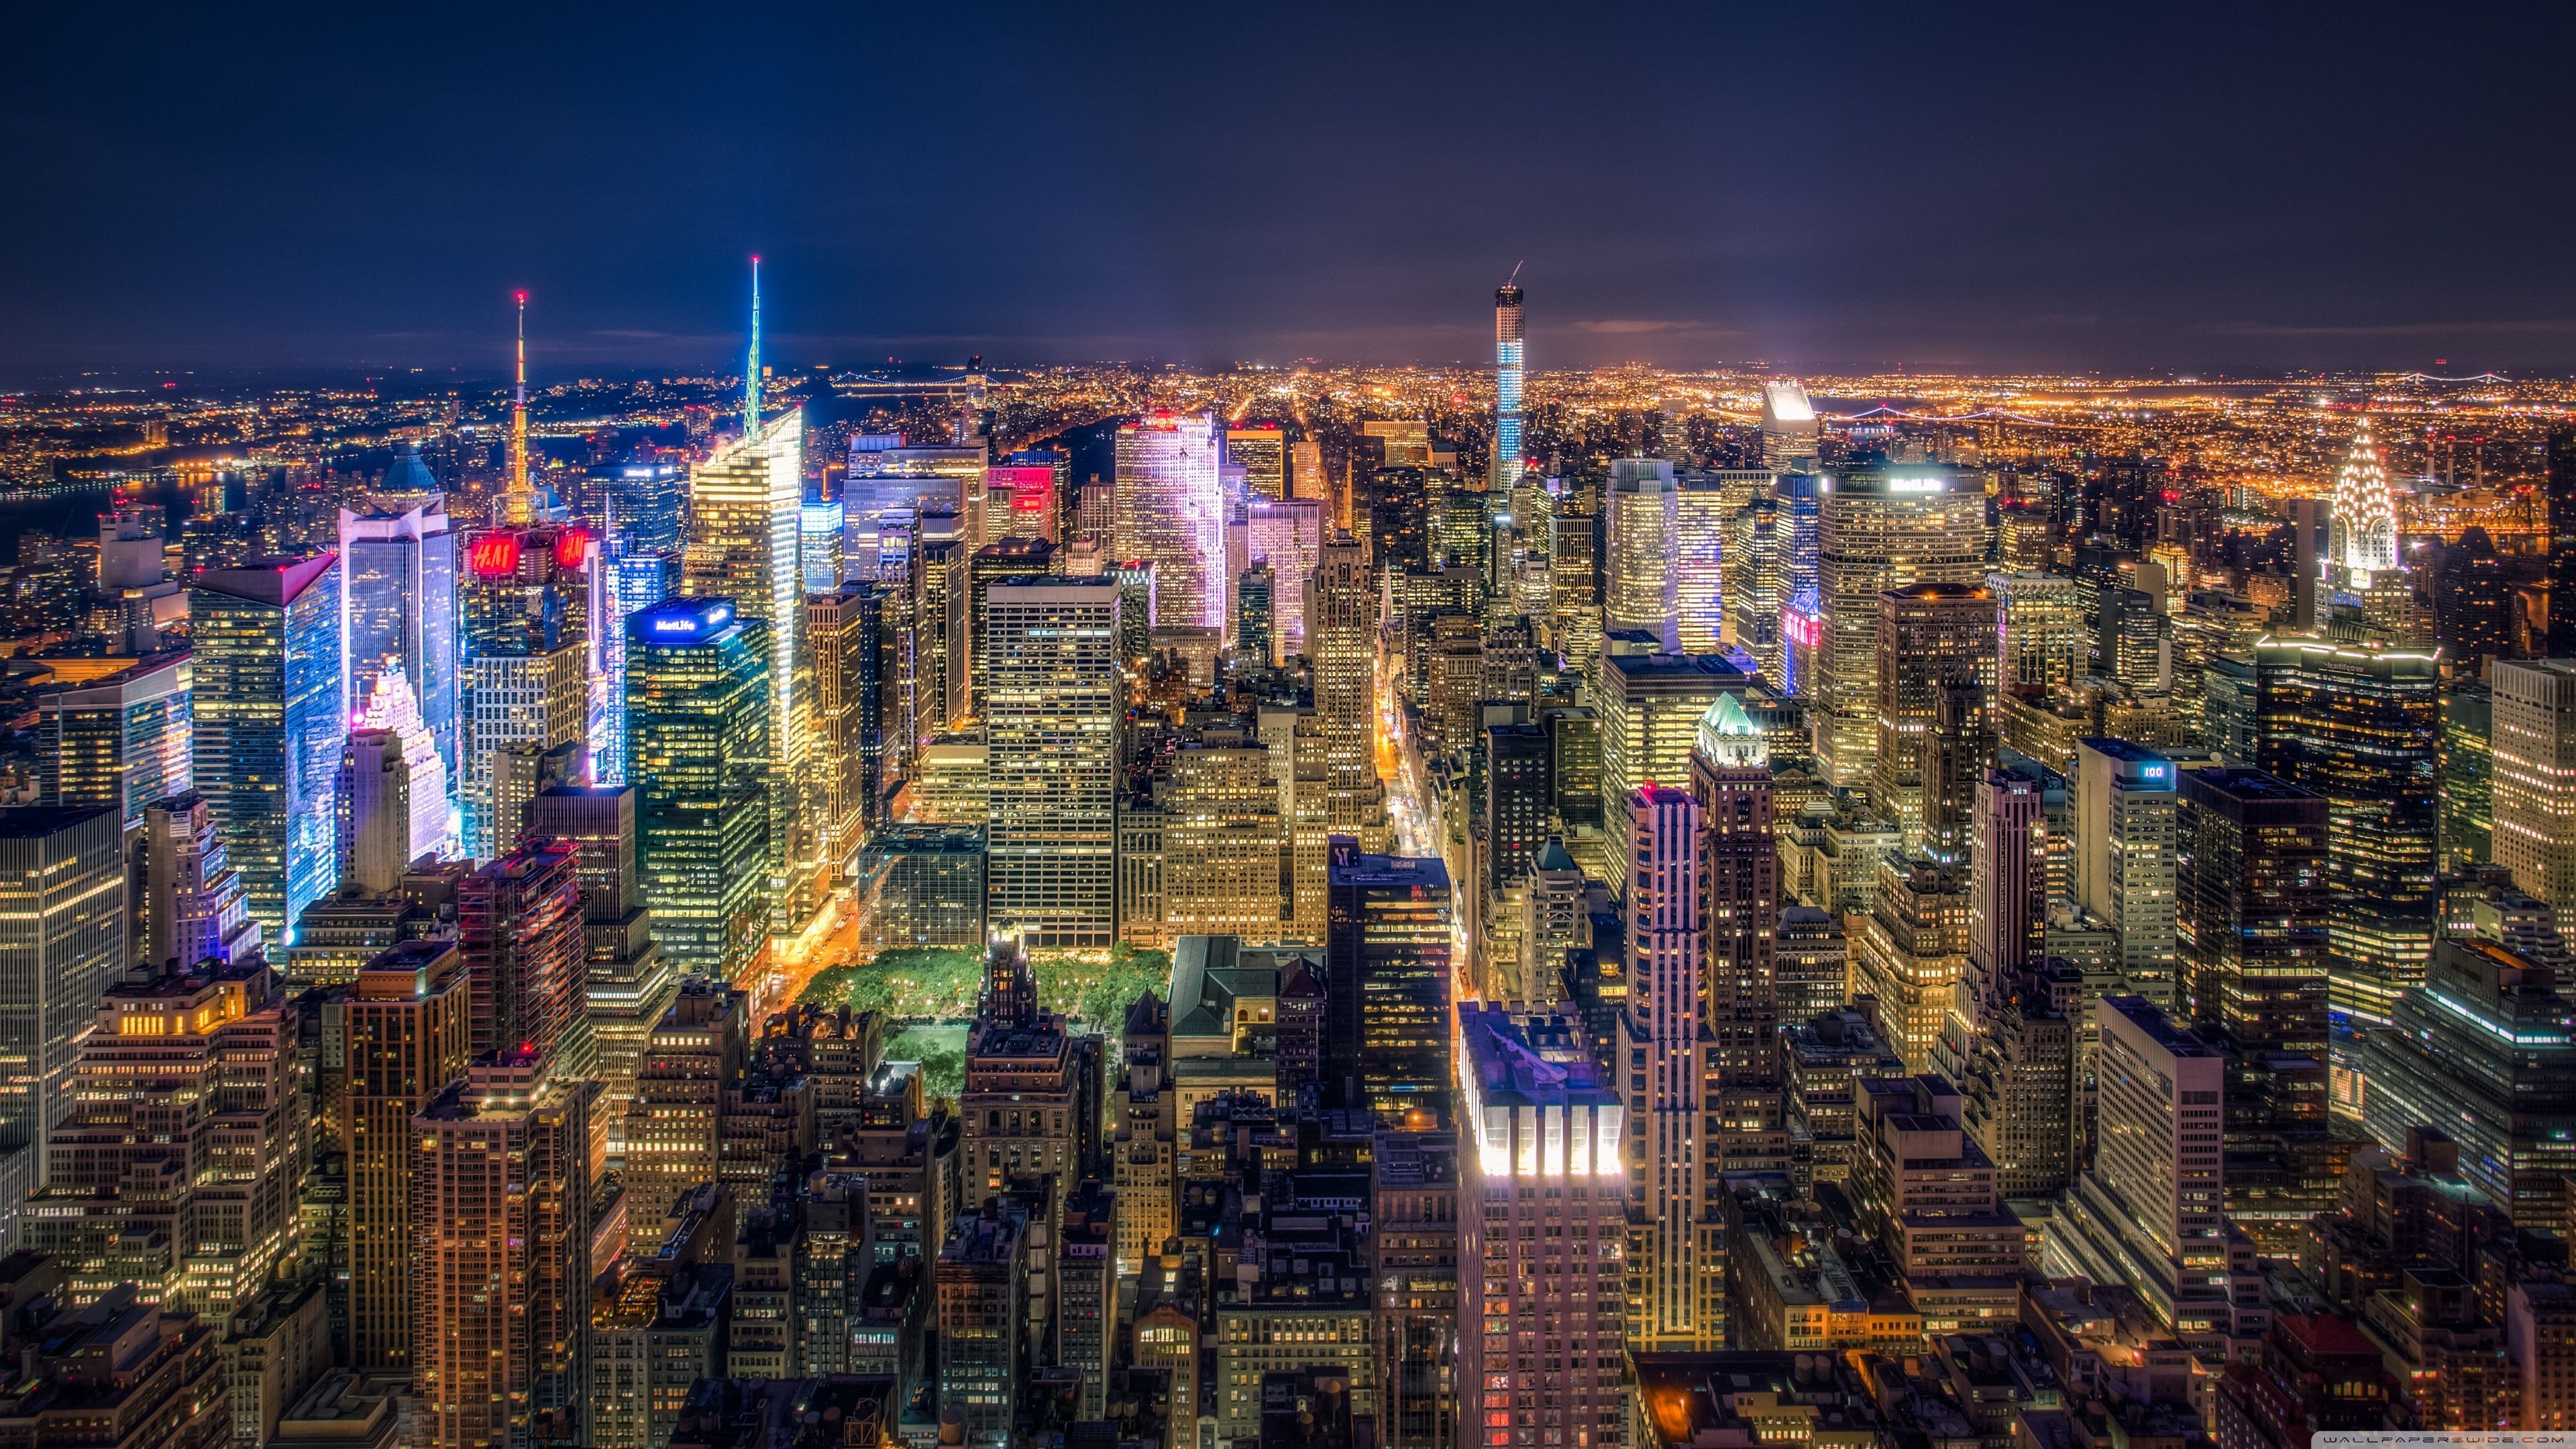 Best Of New York City At Night 4k Wallpaper wallpaper. New york cityscape, Aerial view, Manhattan times square